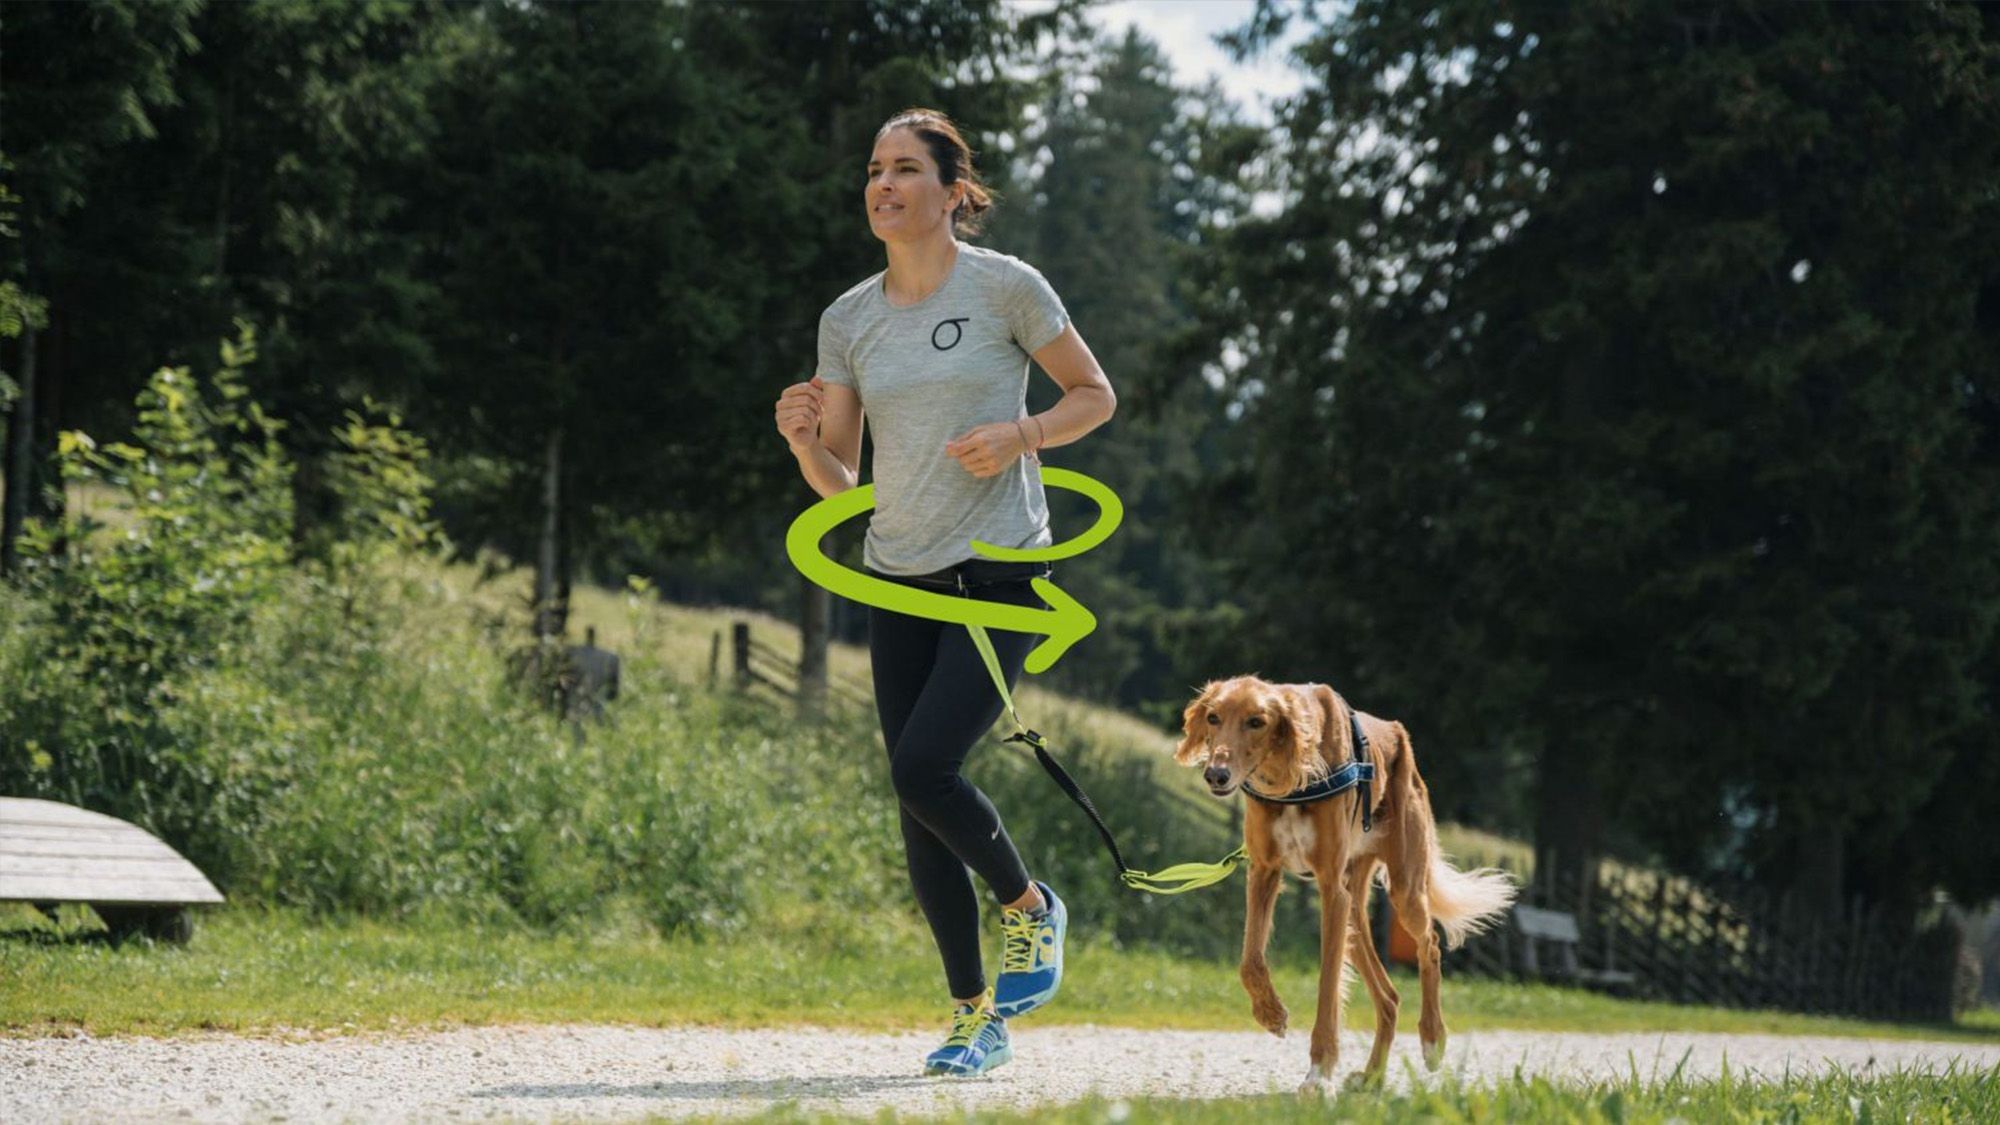 Woman jogging with dog on a leash